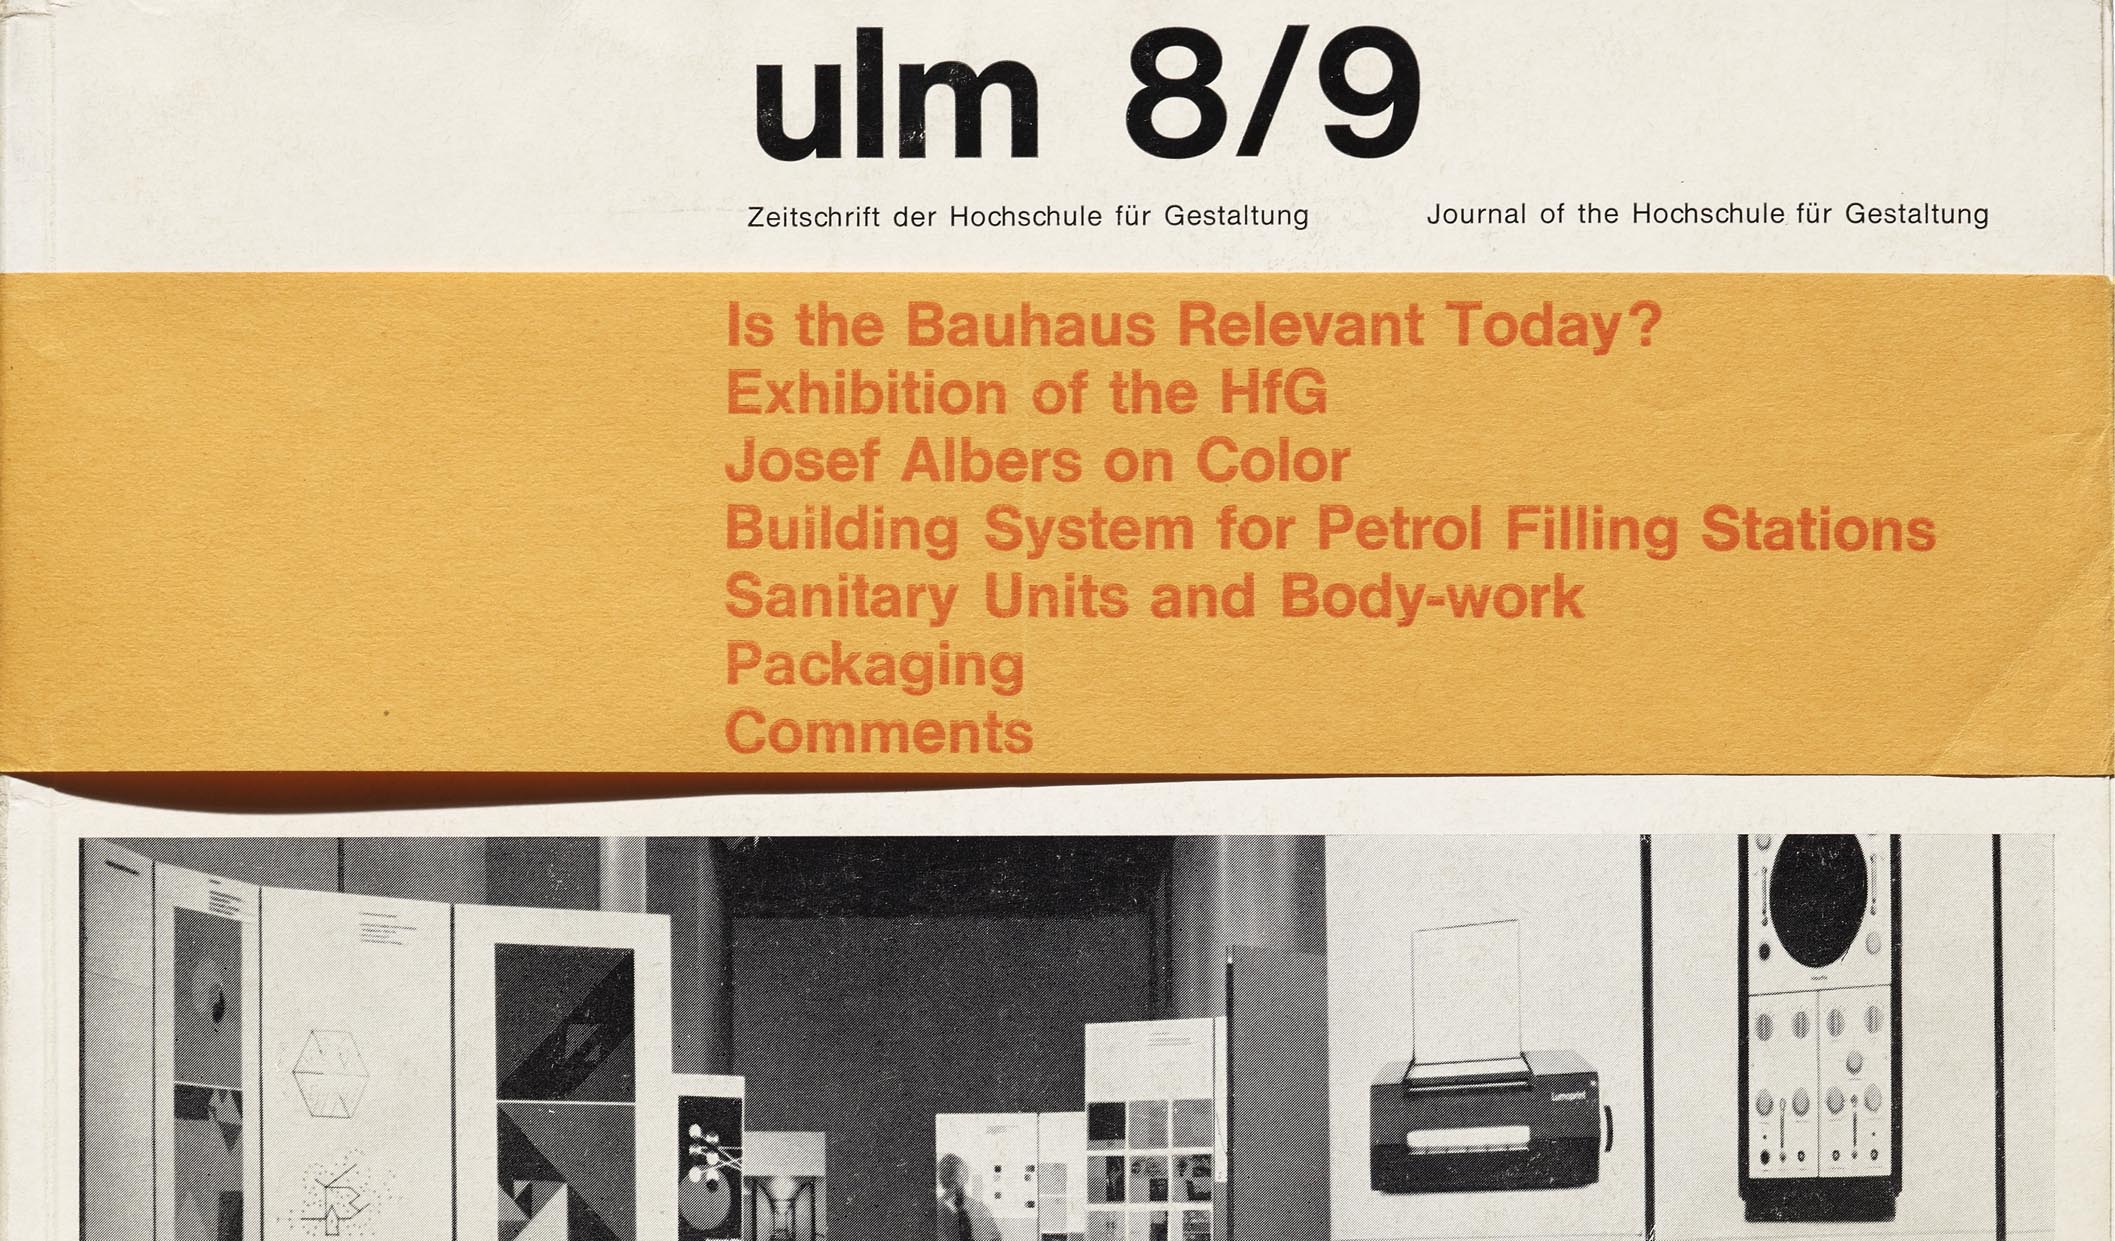 Periodicals as Collections, No. 3: Information and ulm 